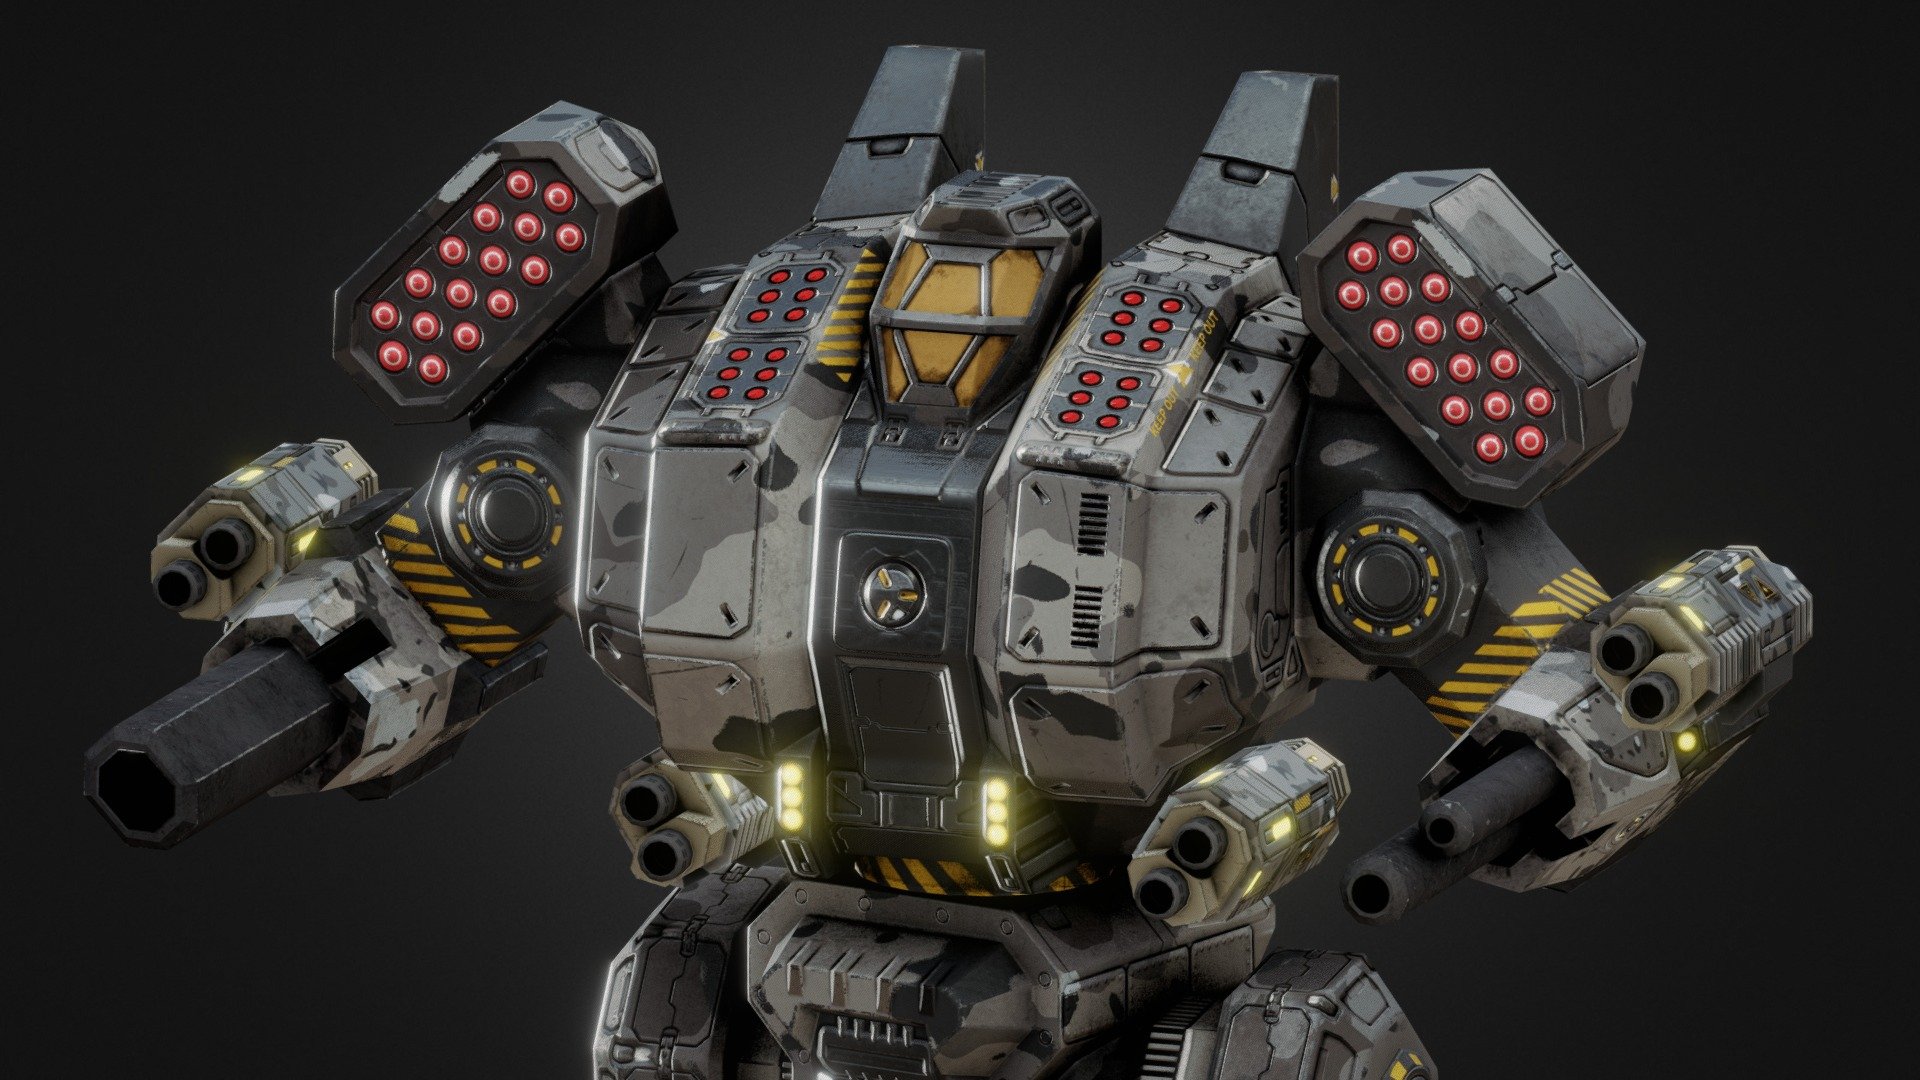 Spartan is one of my low-poly mech models designed for mobile game. It contains 2 moduler rifles and 4 lasers with high resolution diffusemap, normalmap,roughnessmap, emissivemap,metallicmap and specularmaps. Model is rigged and has walking animation embedded. Upon the request different animations can be added 3d model